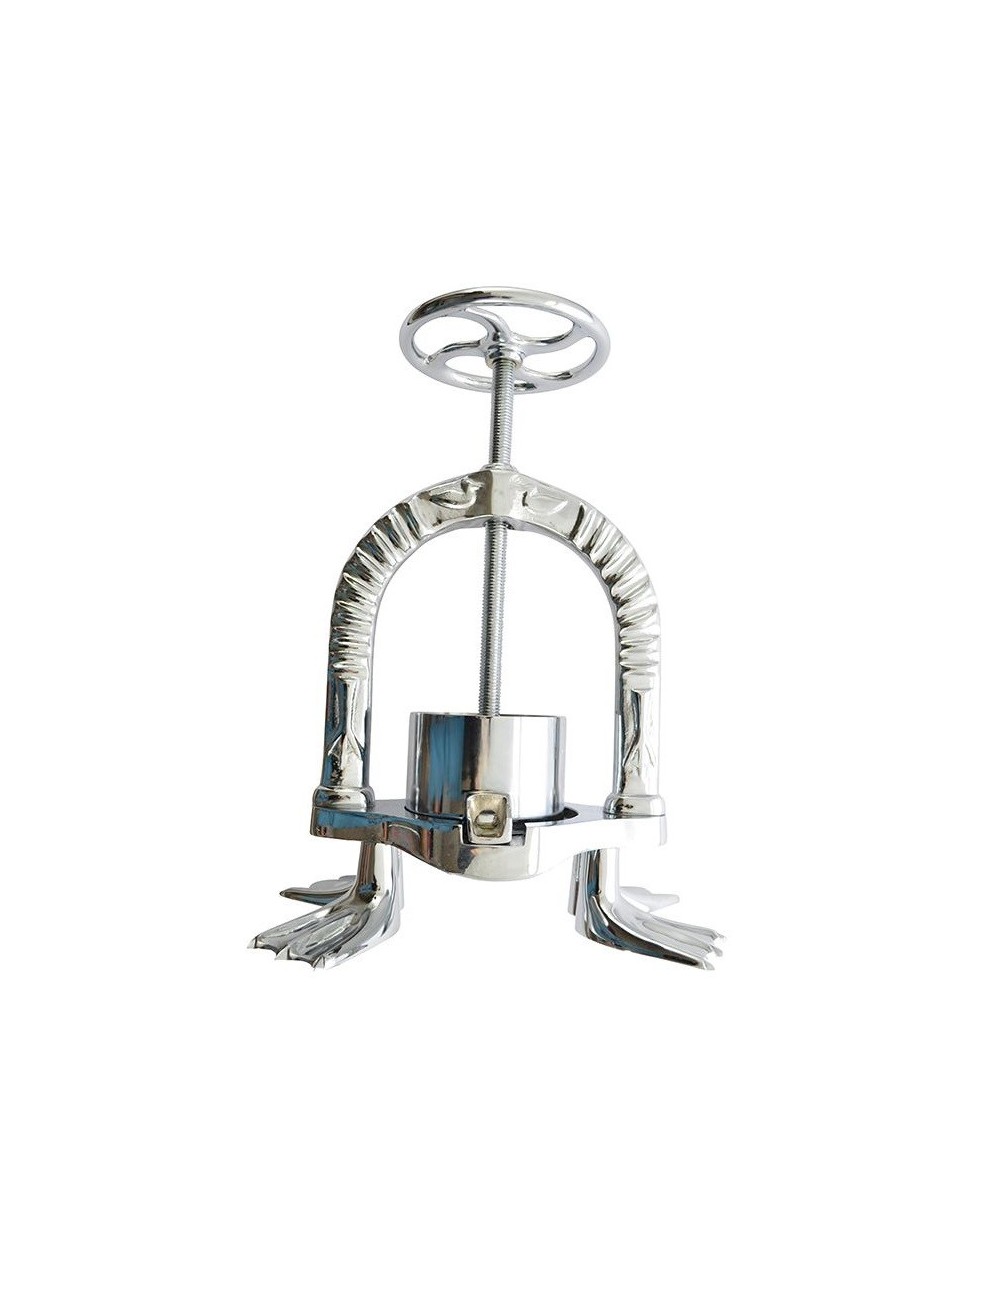 CHROME-PLATED DUCK PRESS - LARGE MODEL